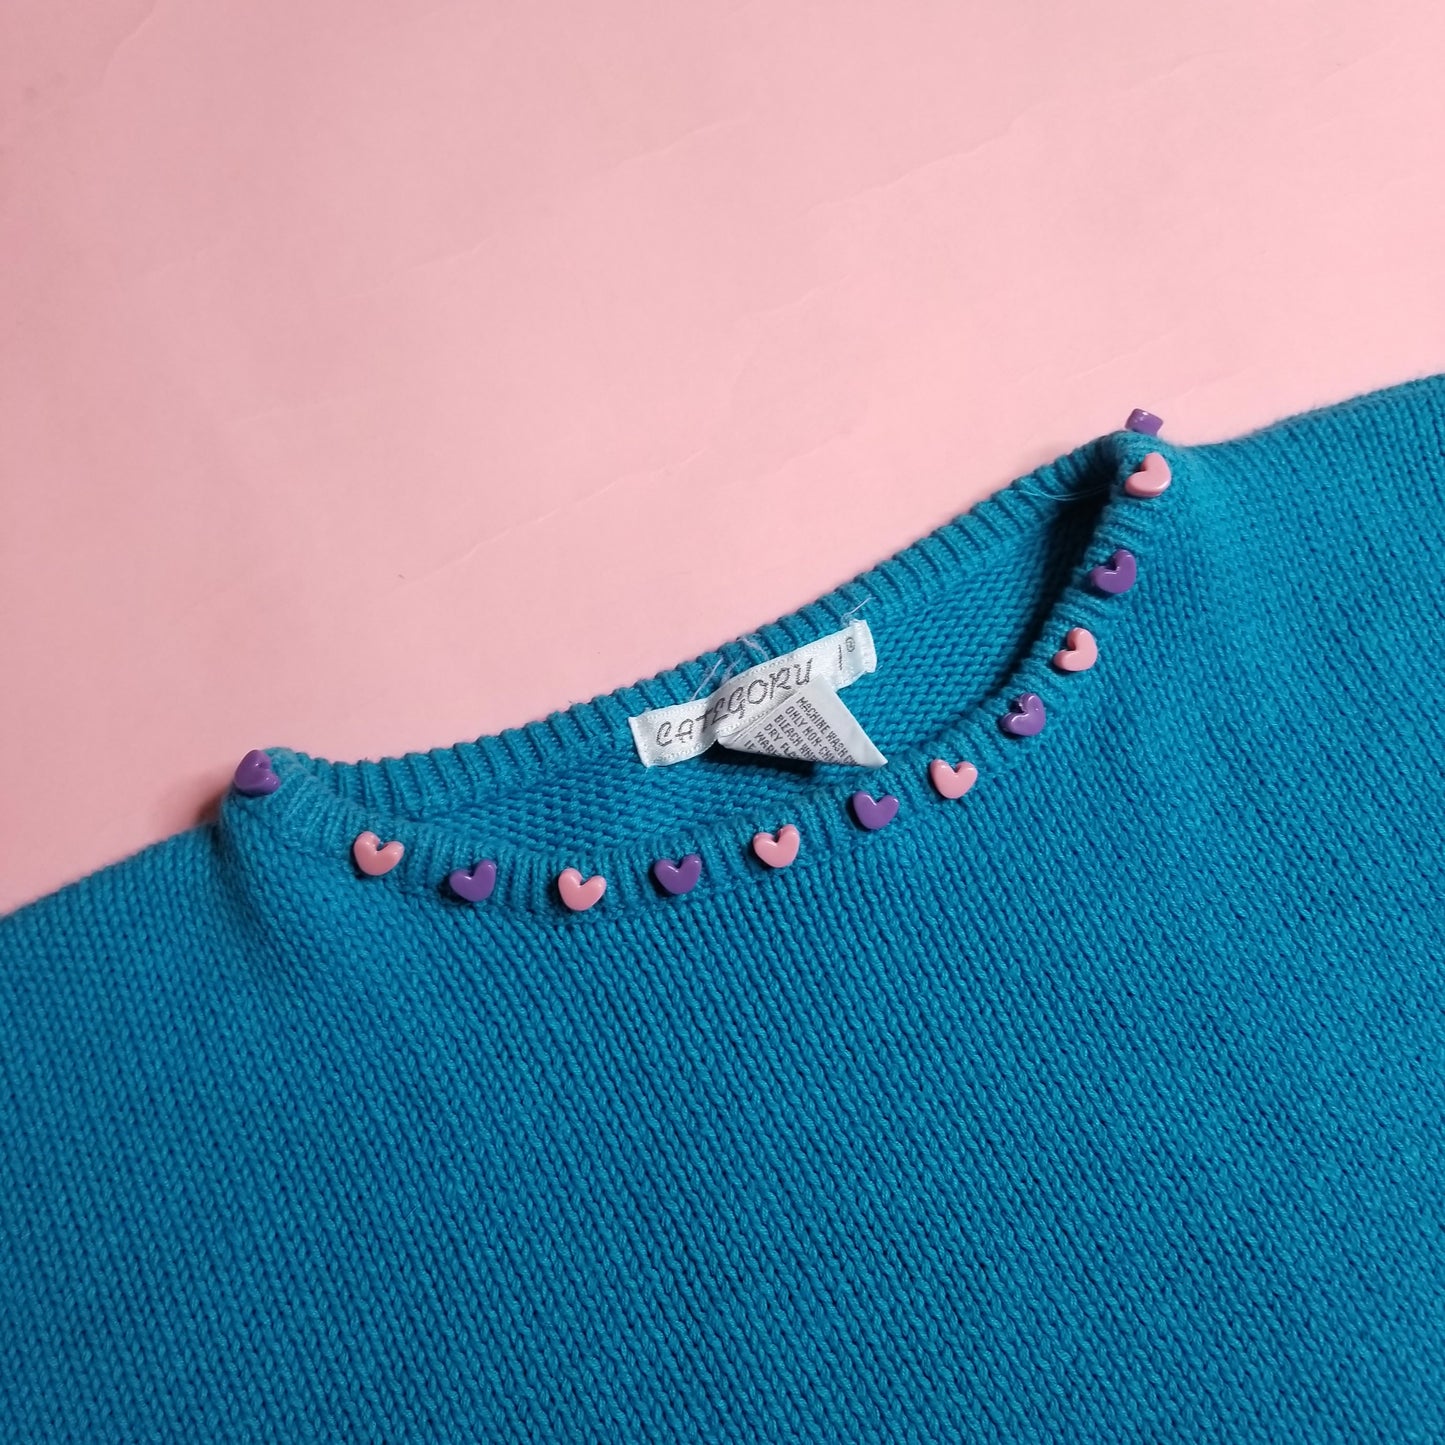 Candy hearts knit sweater top